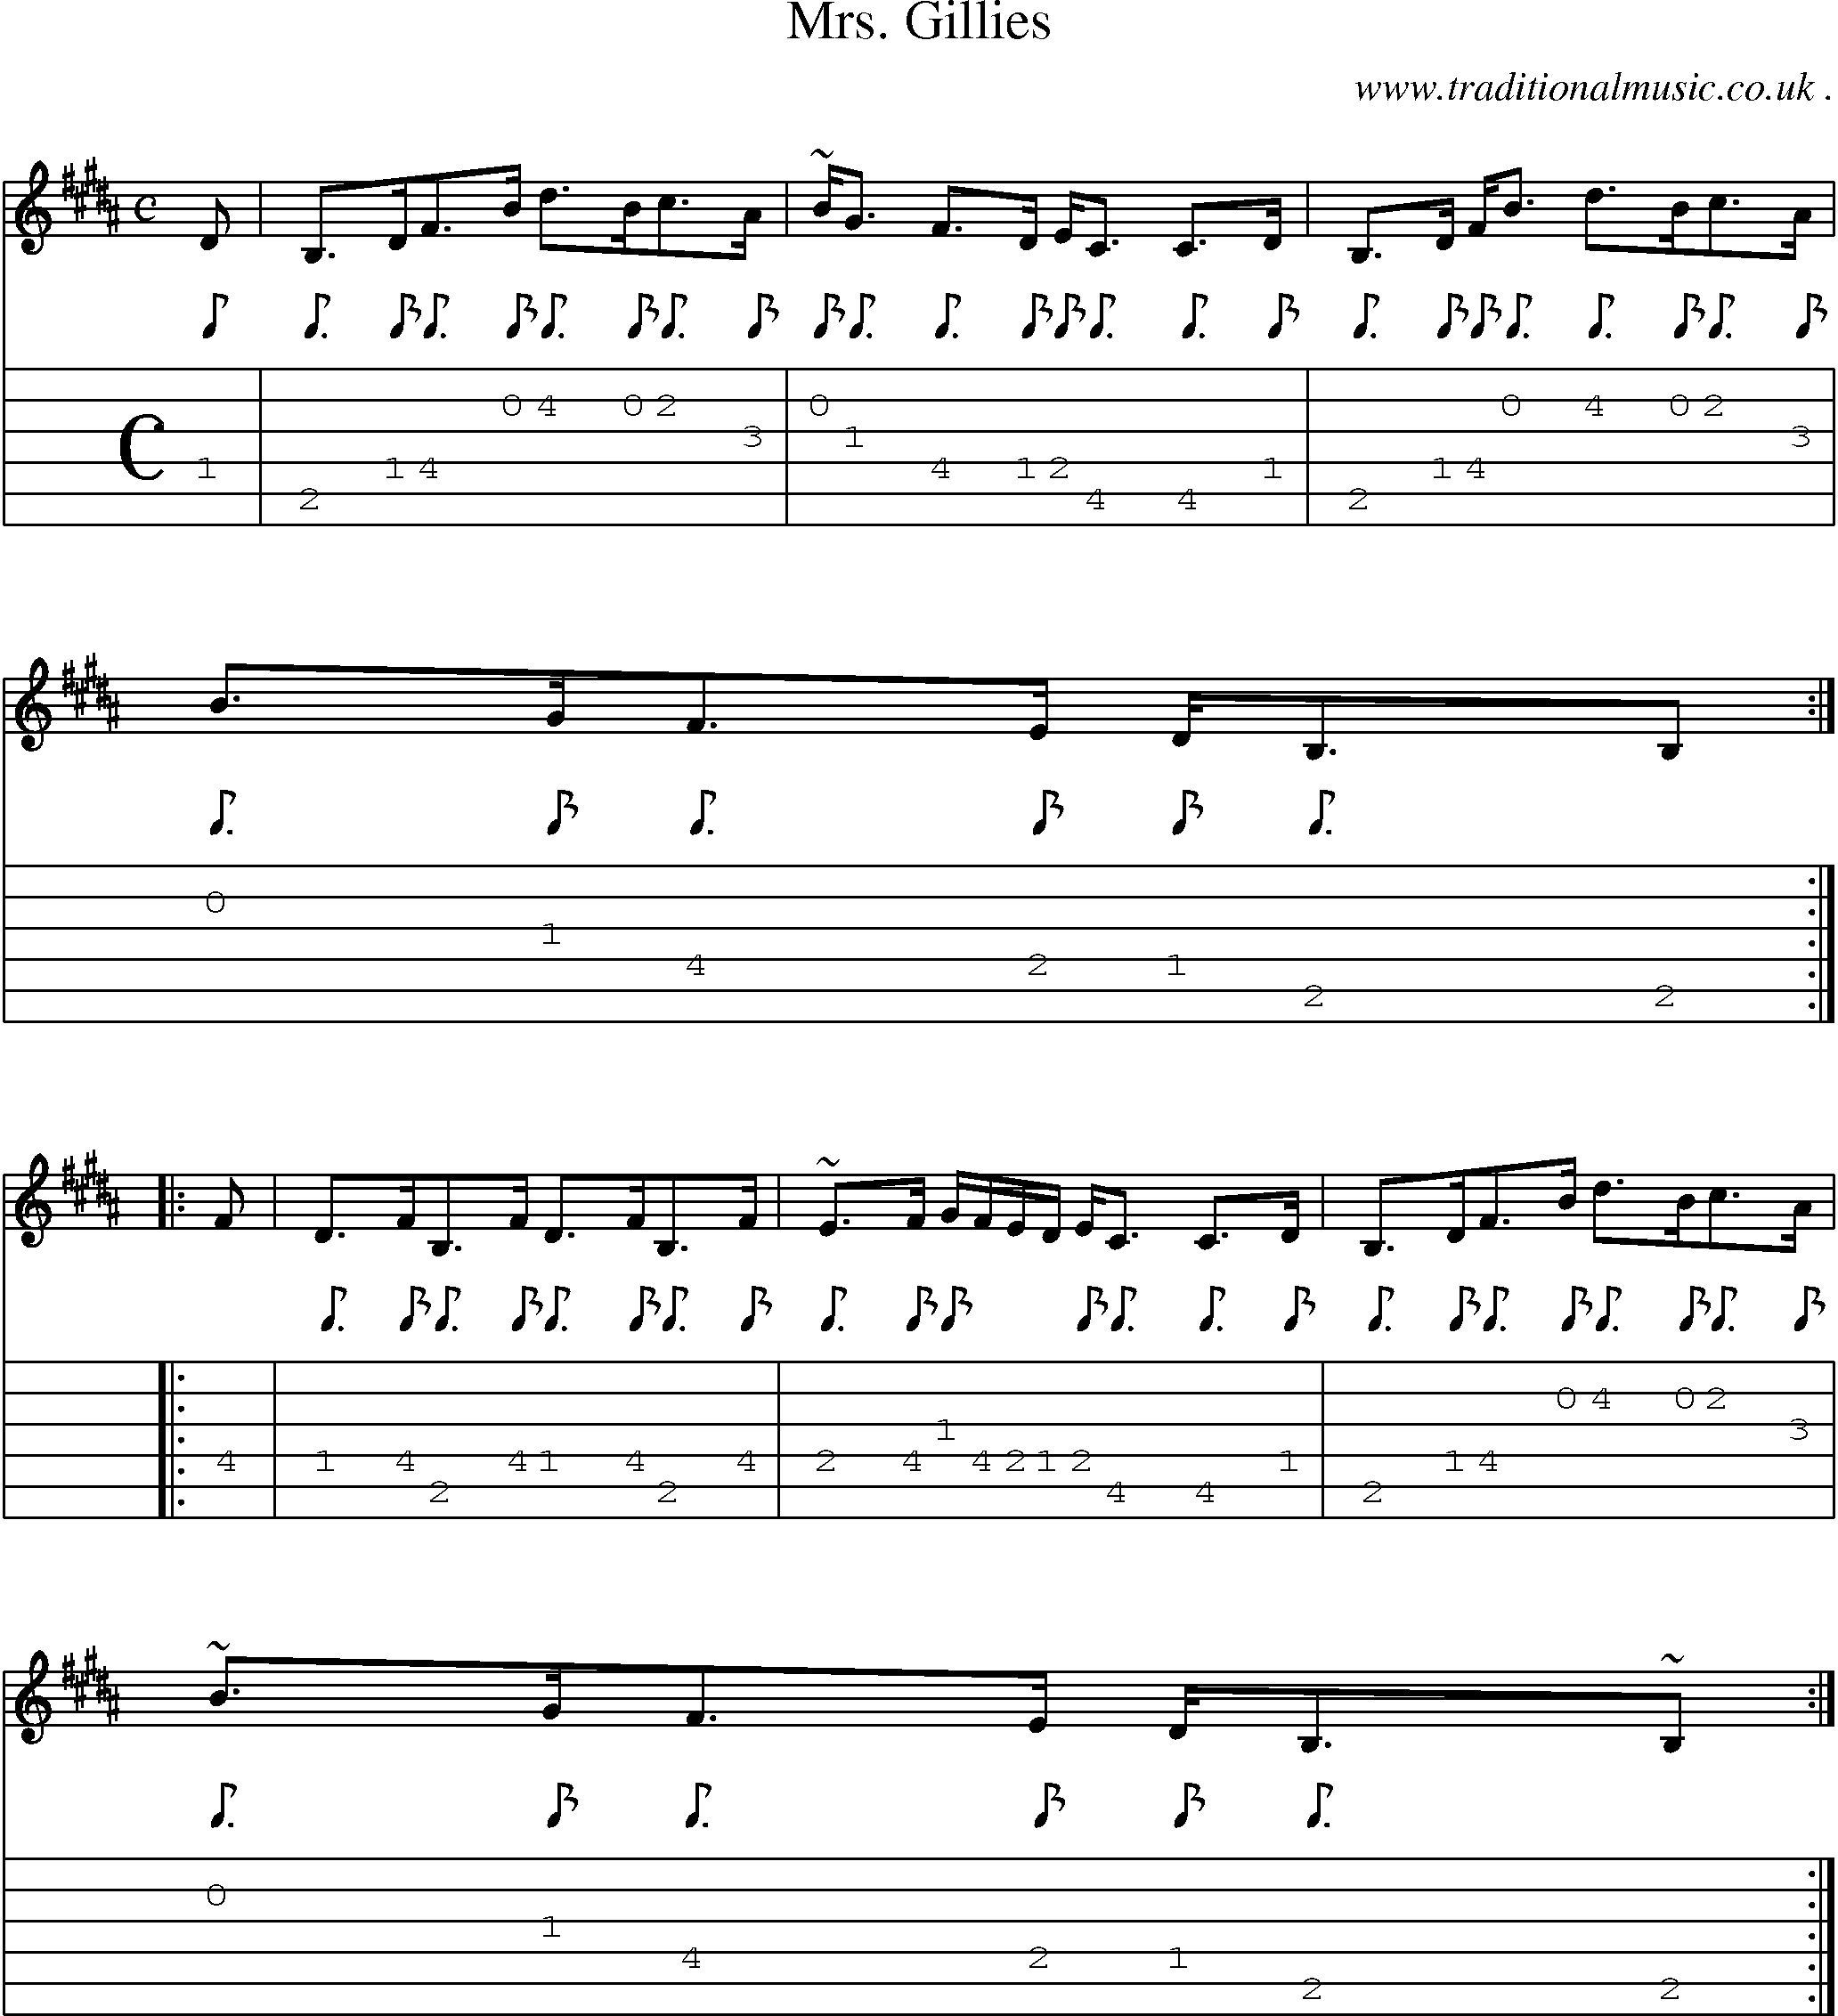 Sheet-music  score, Chords and Guitar Tabs for Mrs Gillies